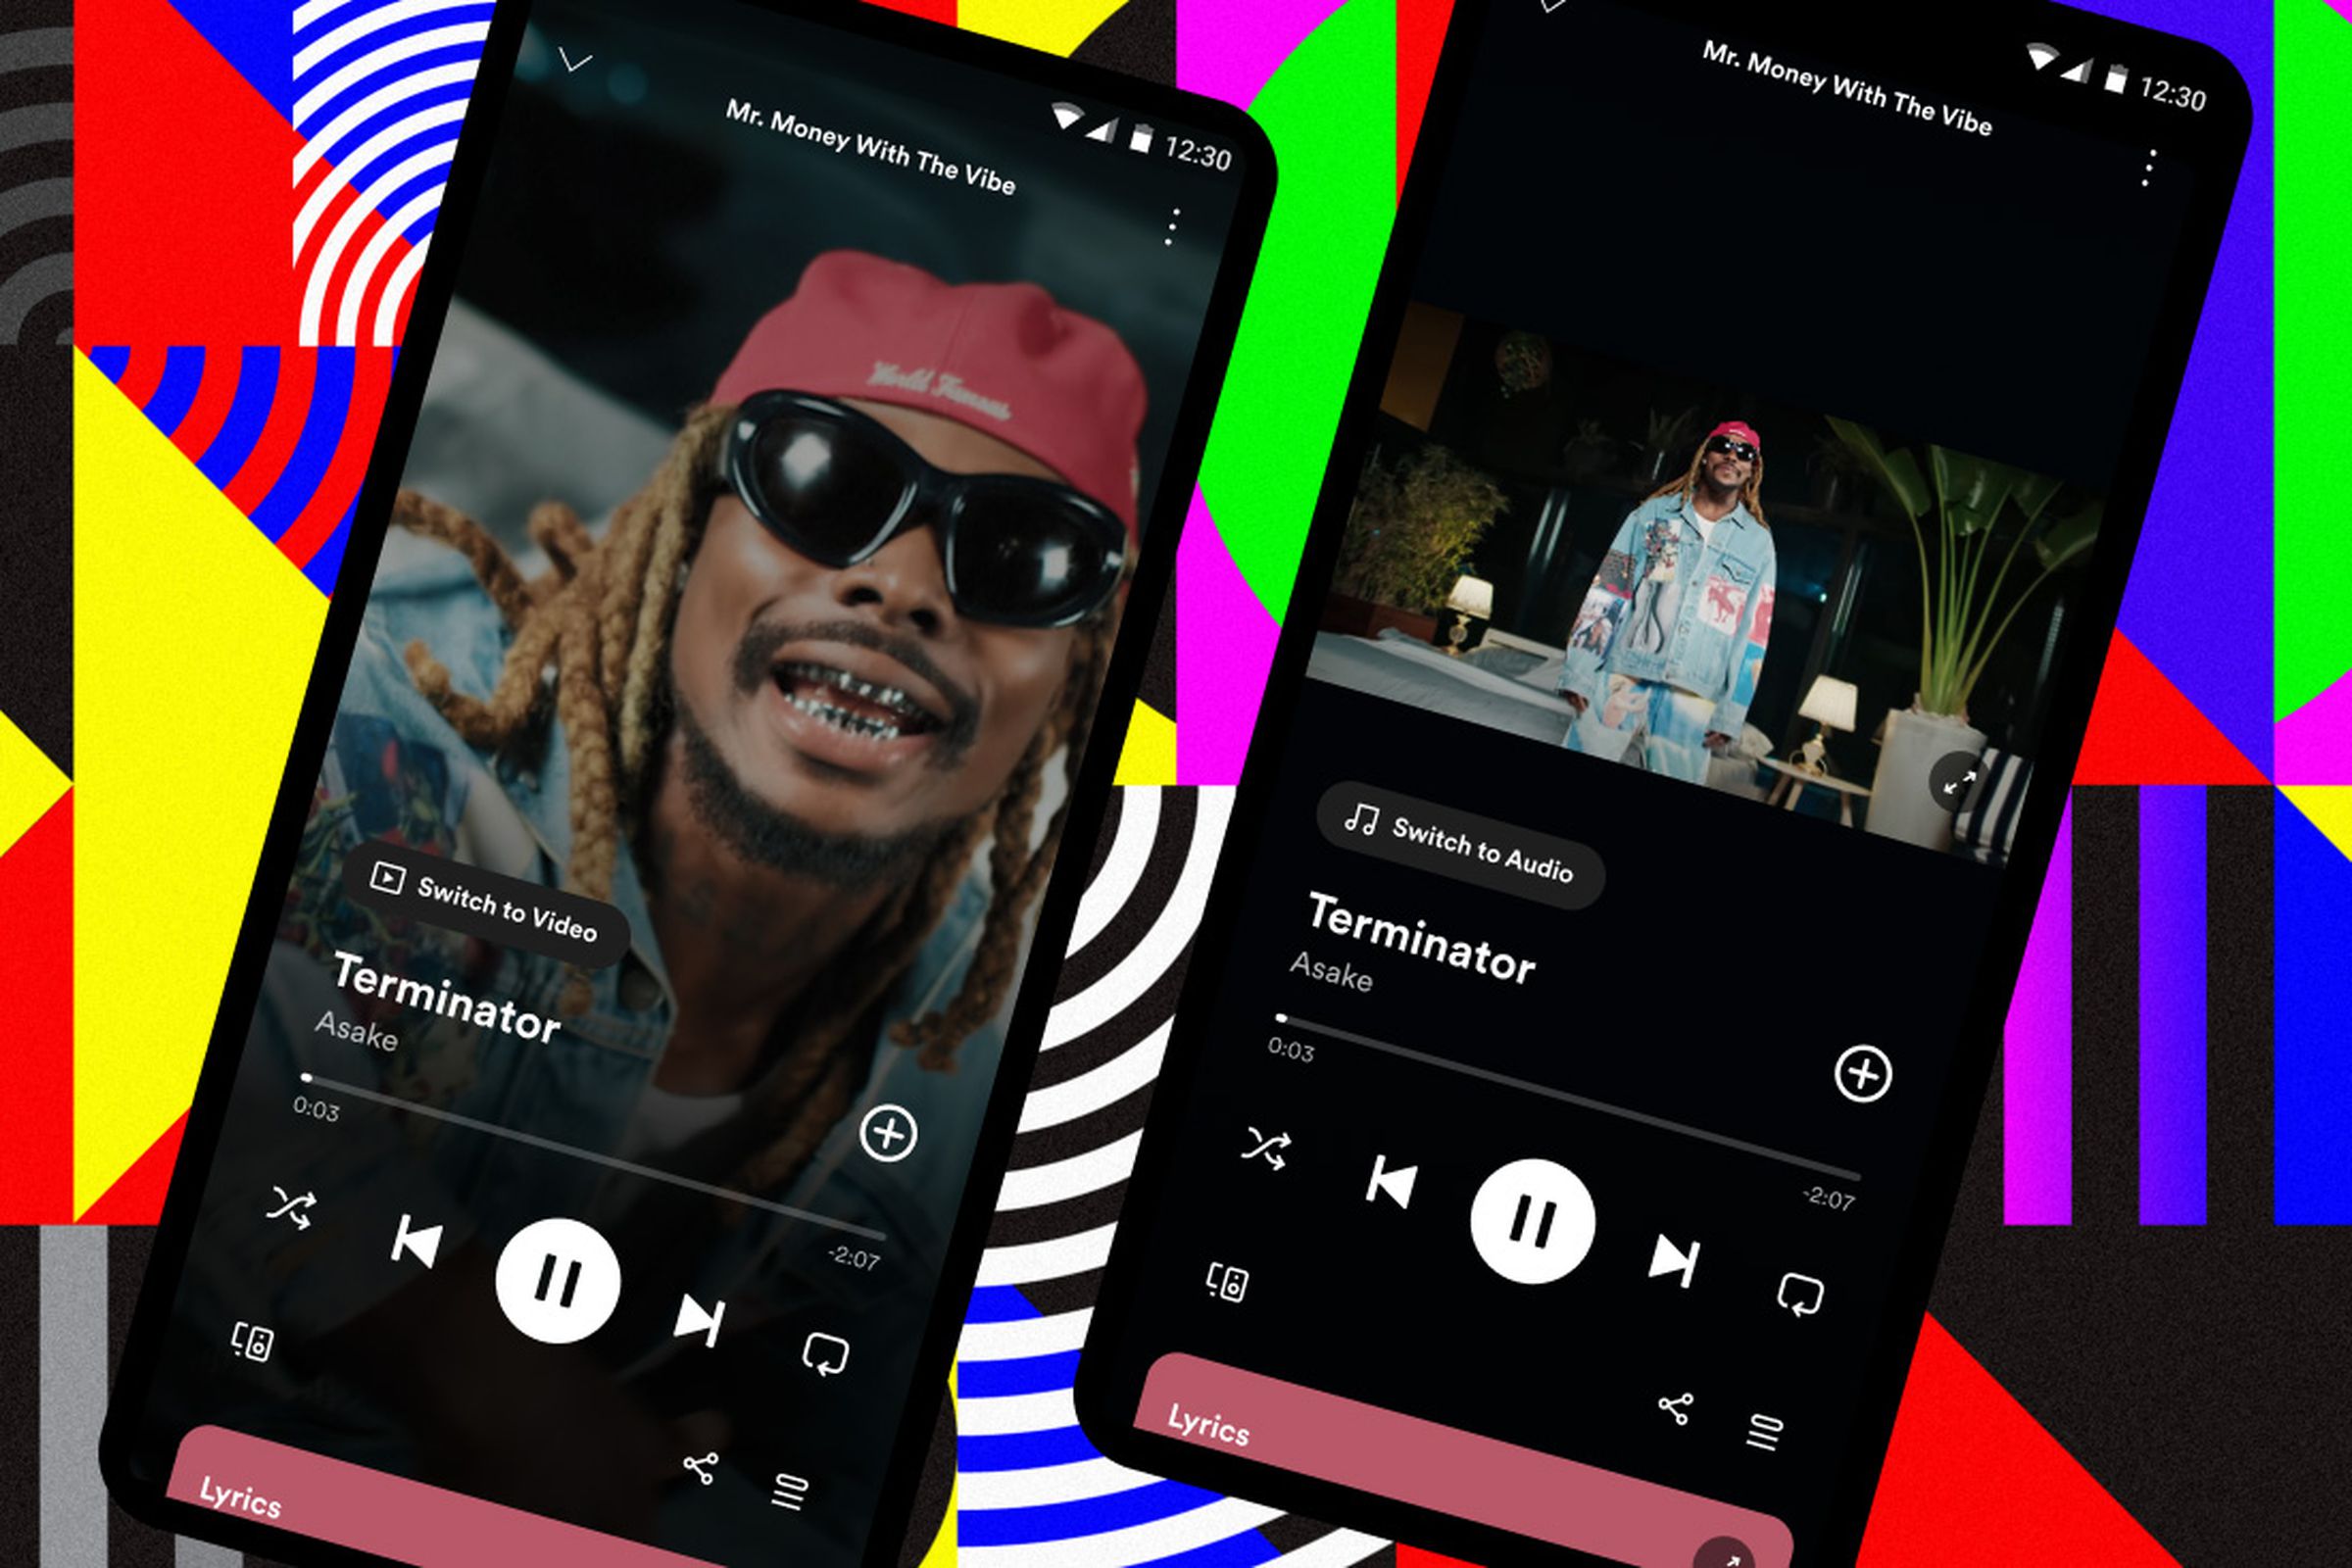 Screenshot of Spotify’s Now Playing screen with the switch to video button visible.